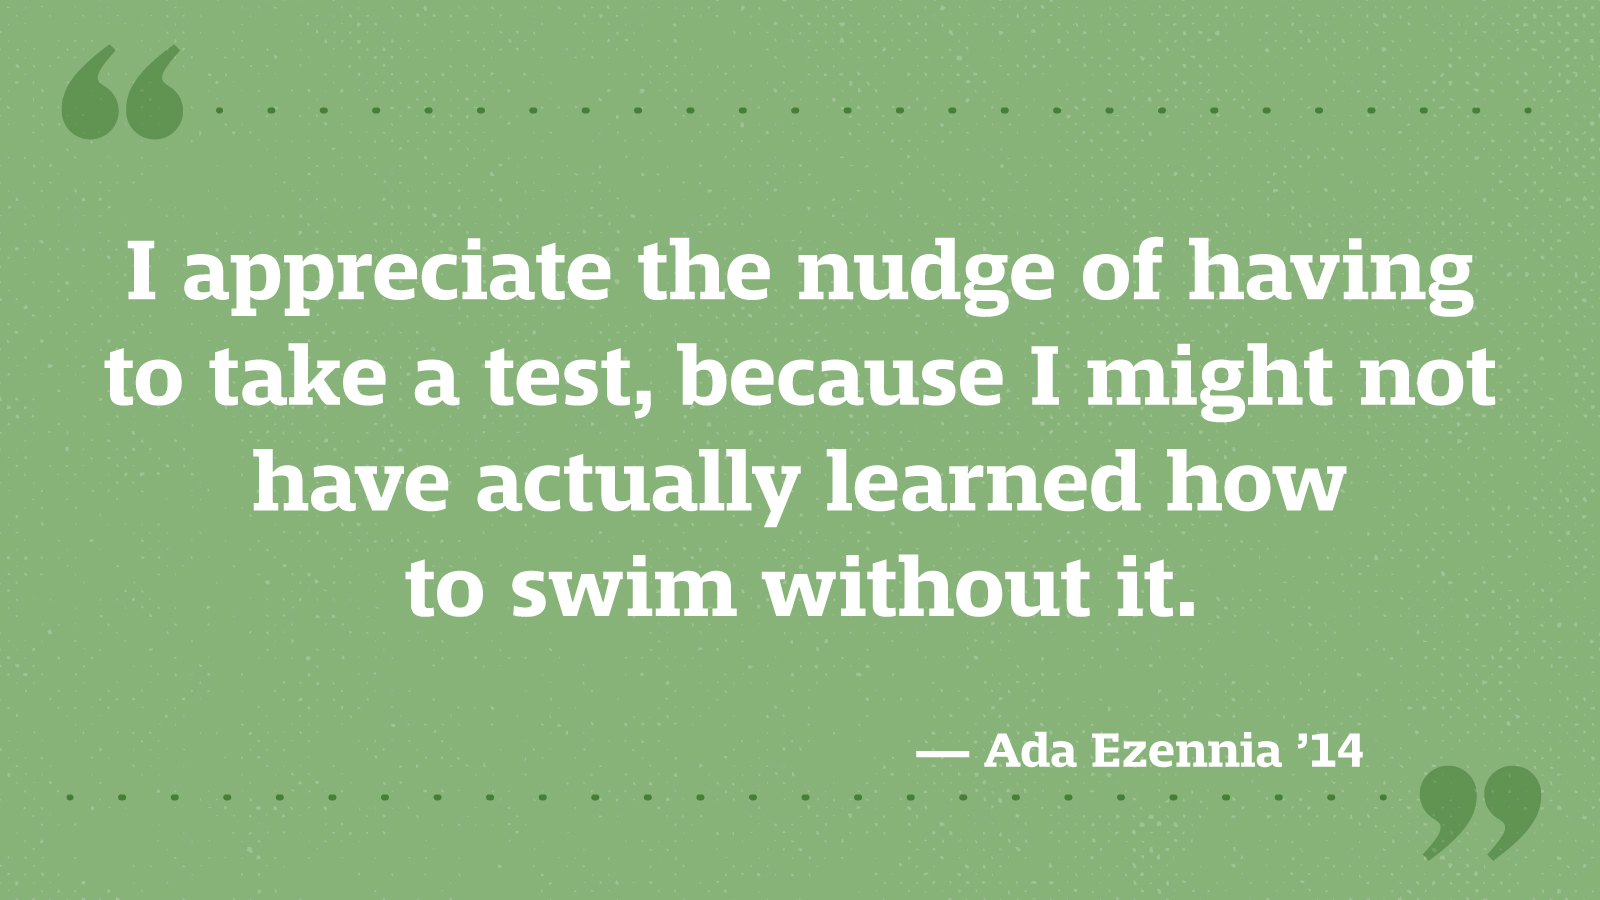 I appreciate the nudge of having to take a test, because I might not have actually learned how to swim without it. — Ada Ezennia ’14